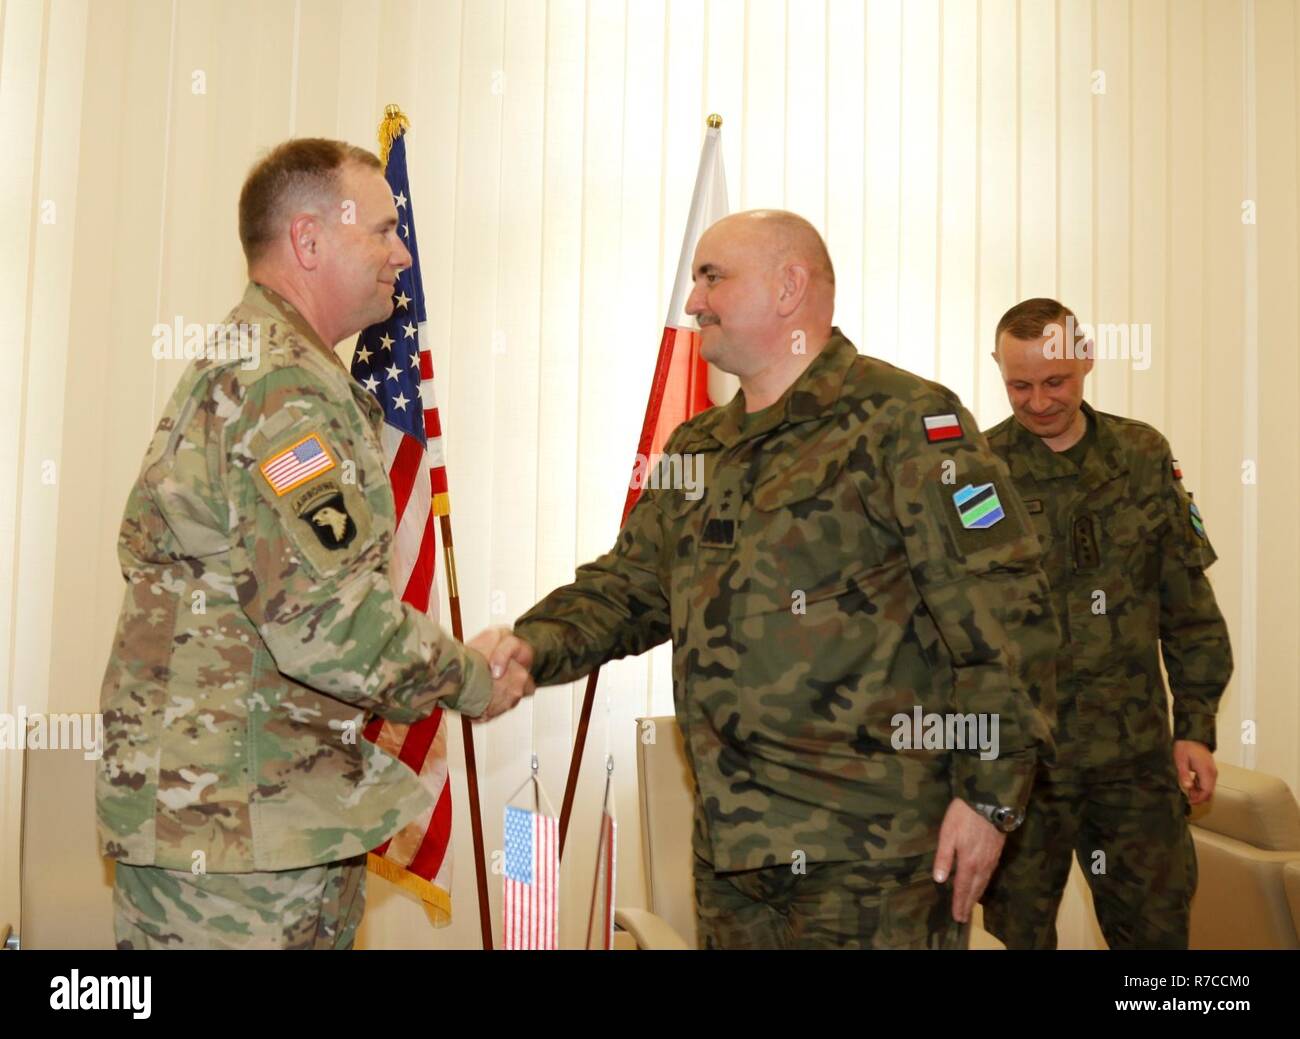 POZNAN, Poland—Lt. Gen. Ben Hodges, commanding general, U.S. Army Europe,  and Maj. Gen. Jaroslaw Mika, general commander, Polish Armed Forces (PAF),  affirm U.S. Army and PAF's collaboration to improve readiness and  interoperability